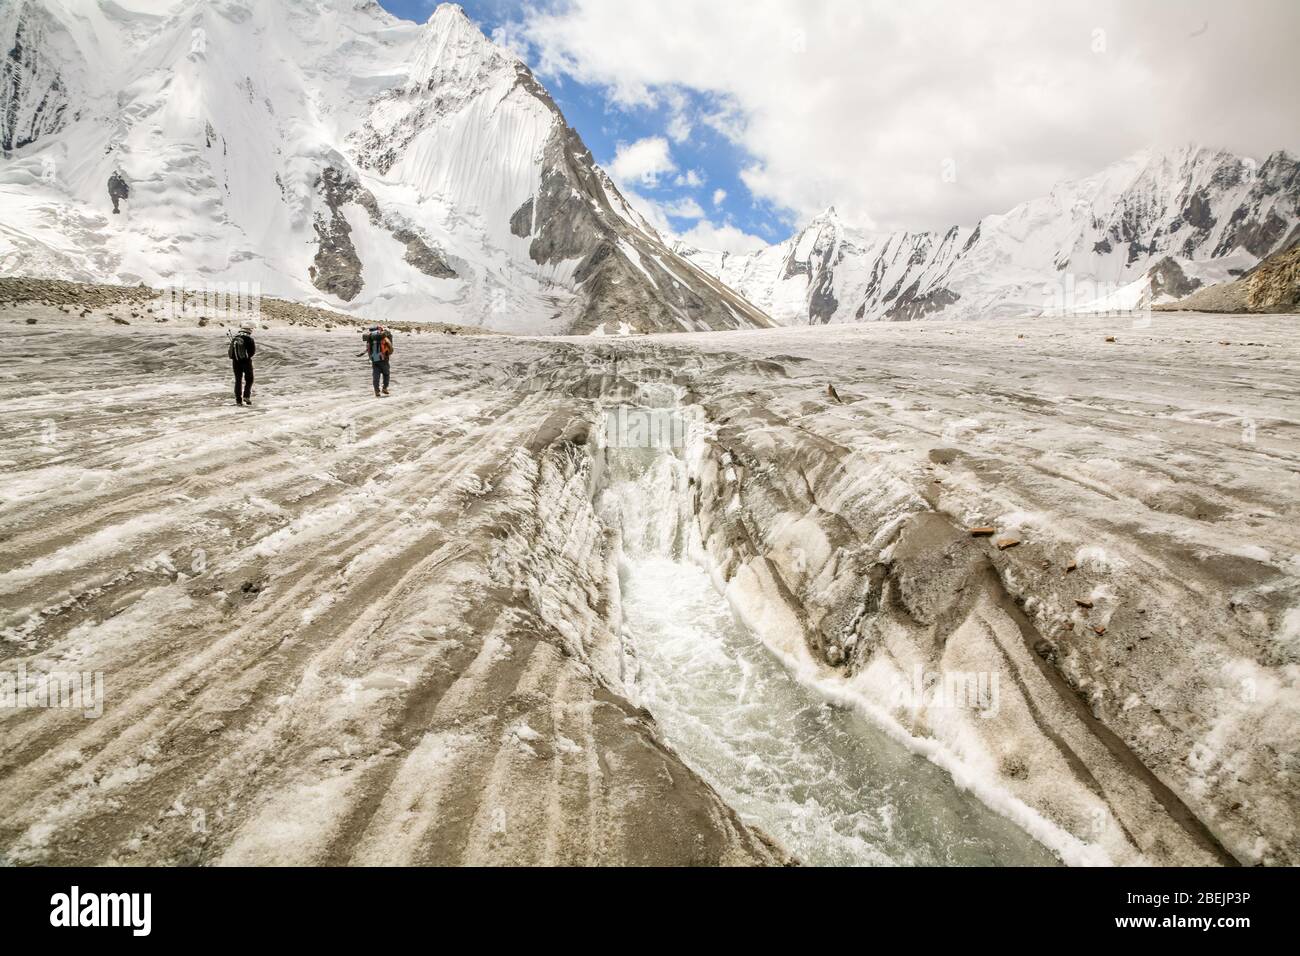 Two hikers on the Vigne Glacier, near the Concordia area of the Karakoram Mountains in Northern Pakistan. Stock Photo